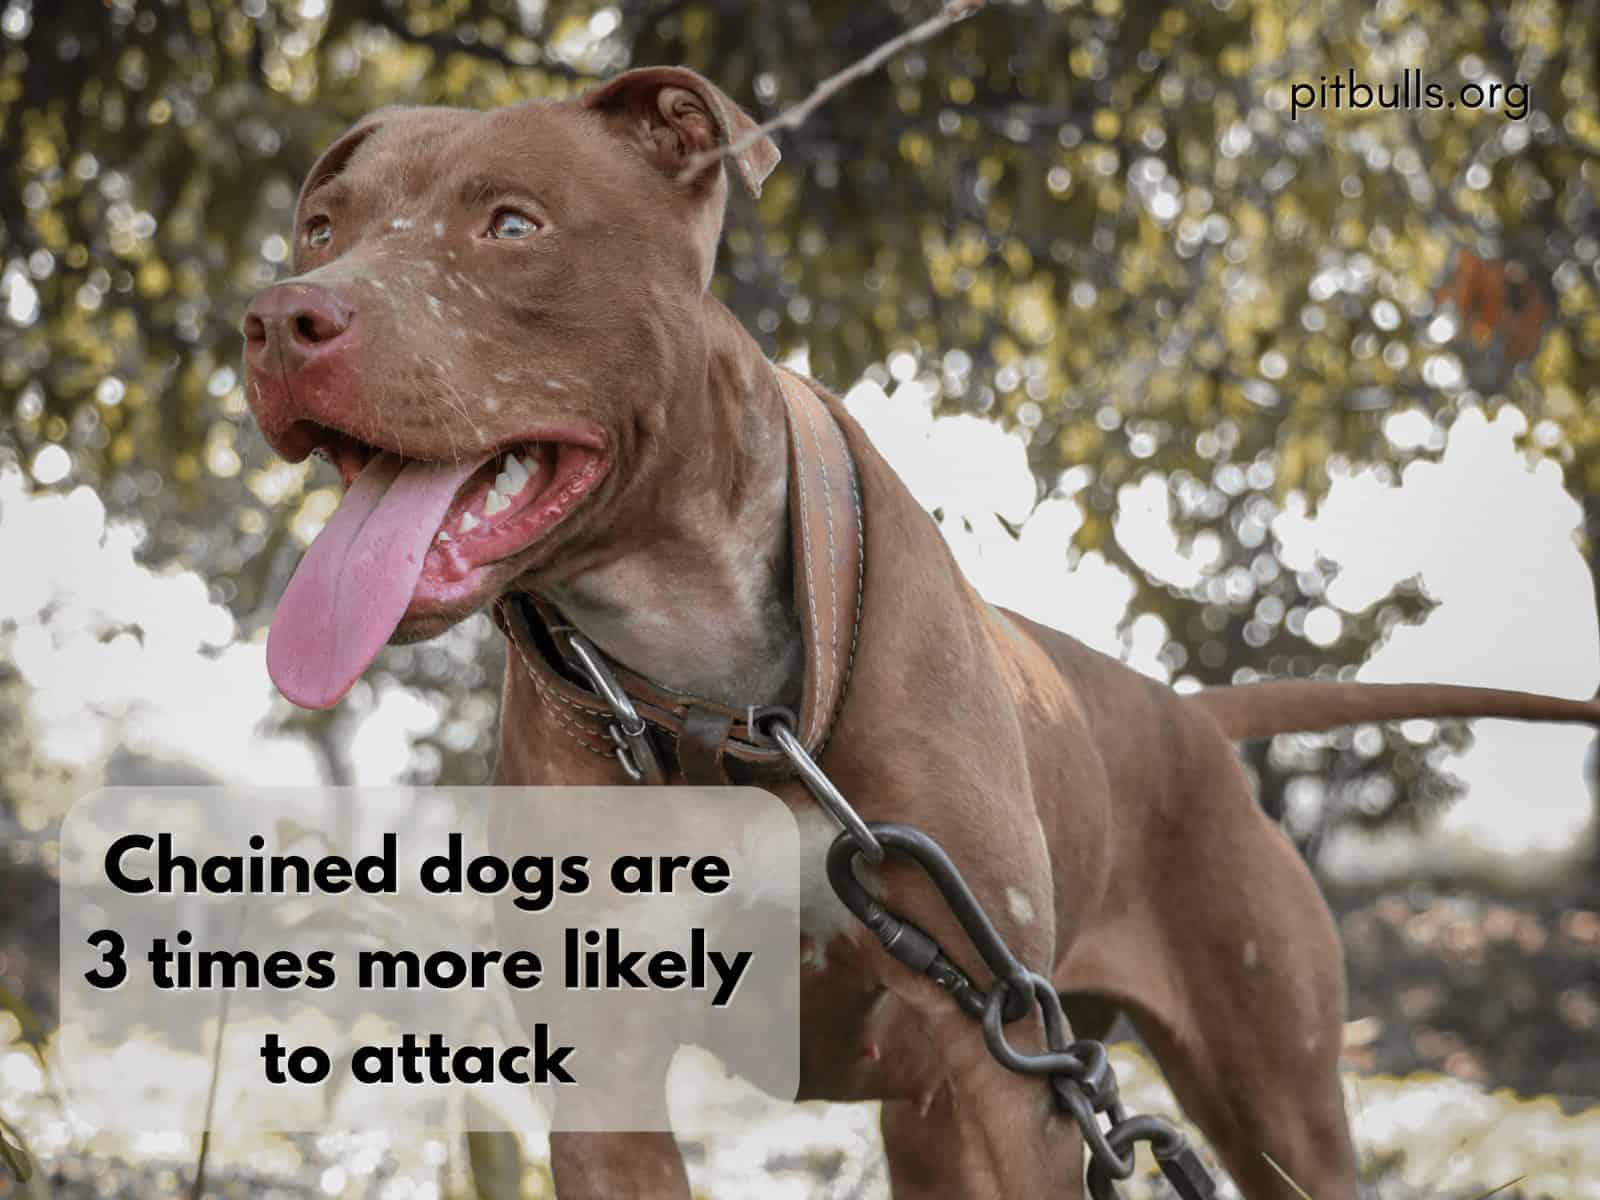 Chained Dogs Attacks Statistics